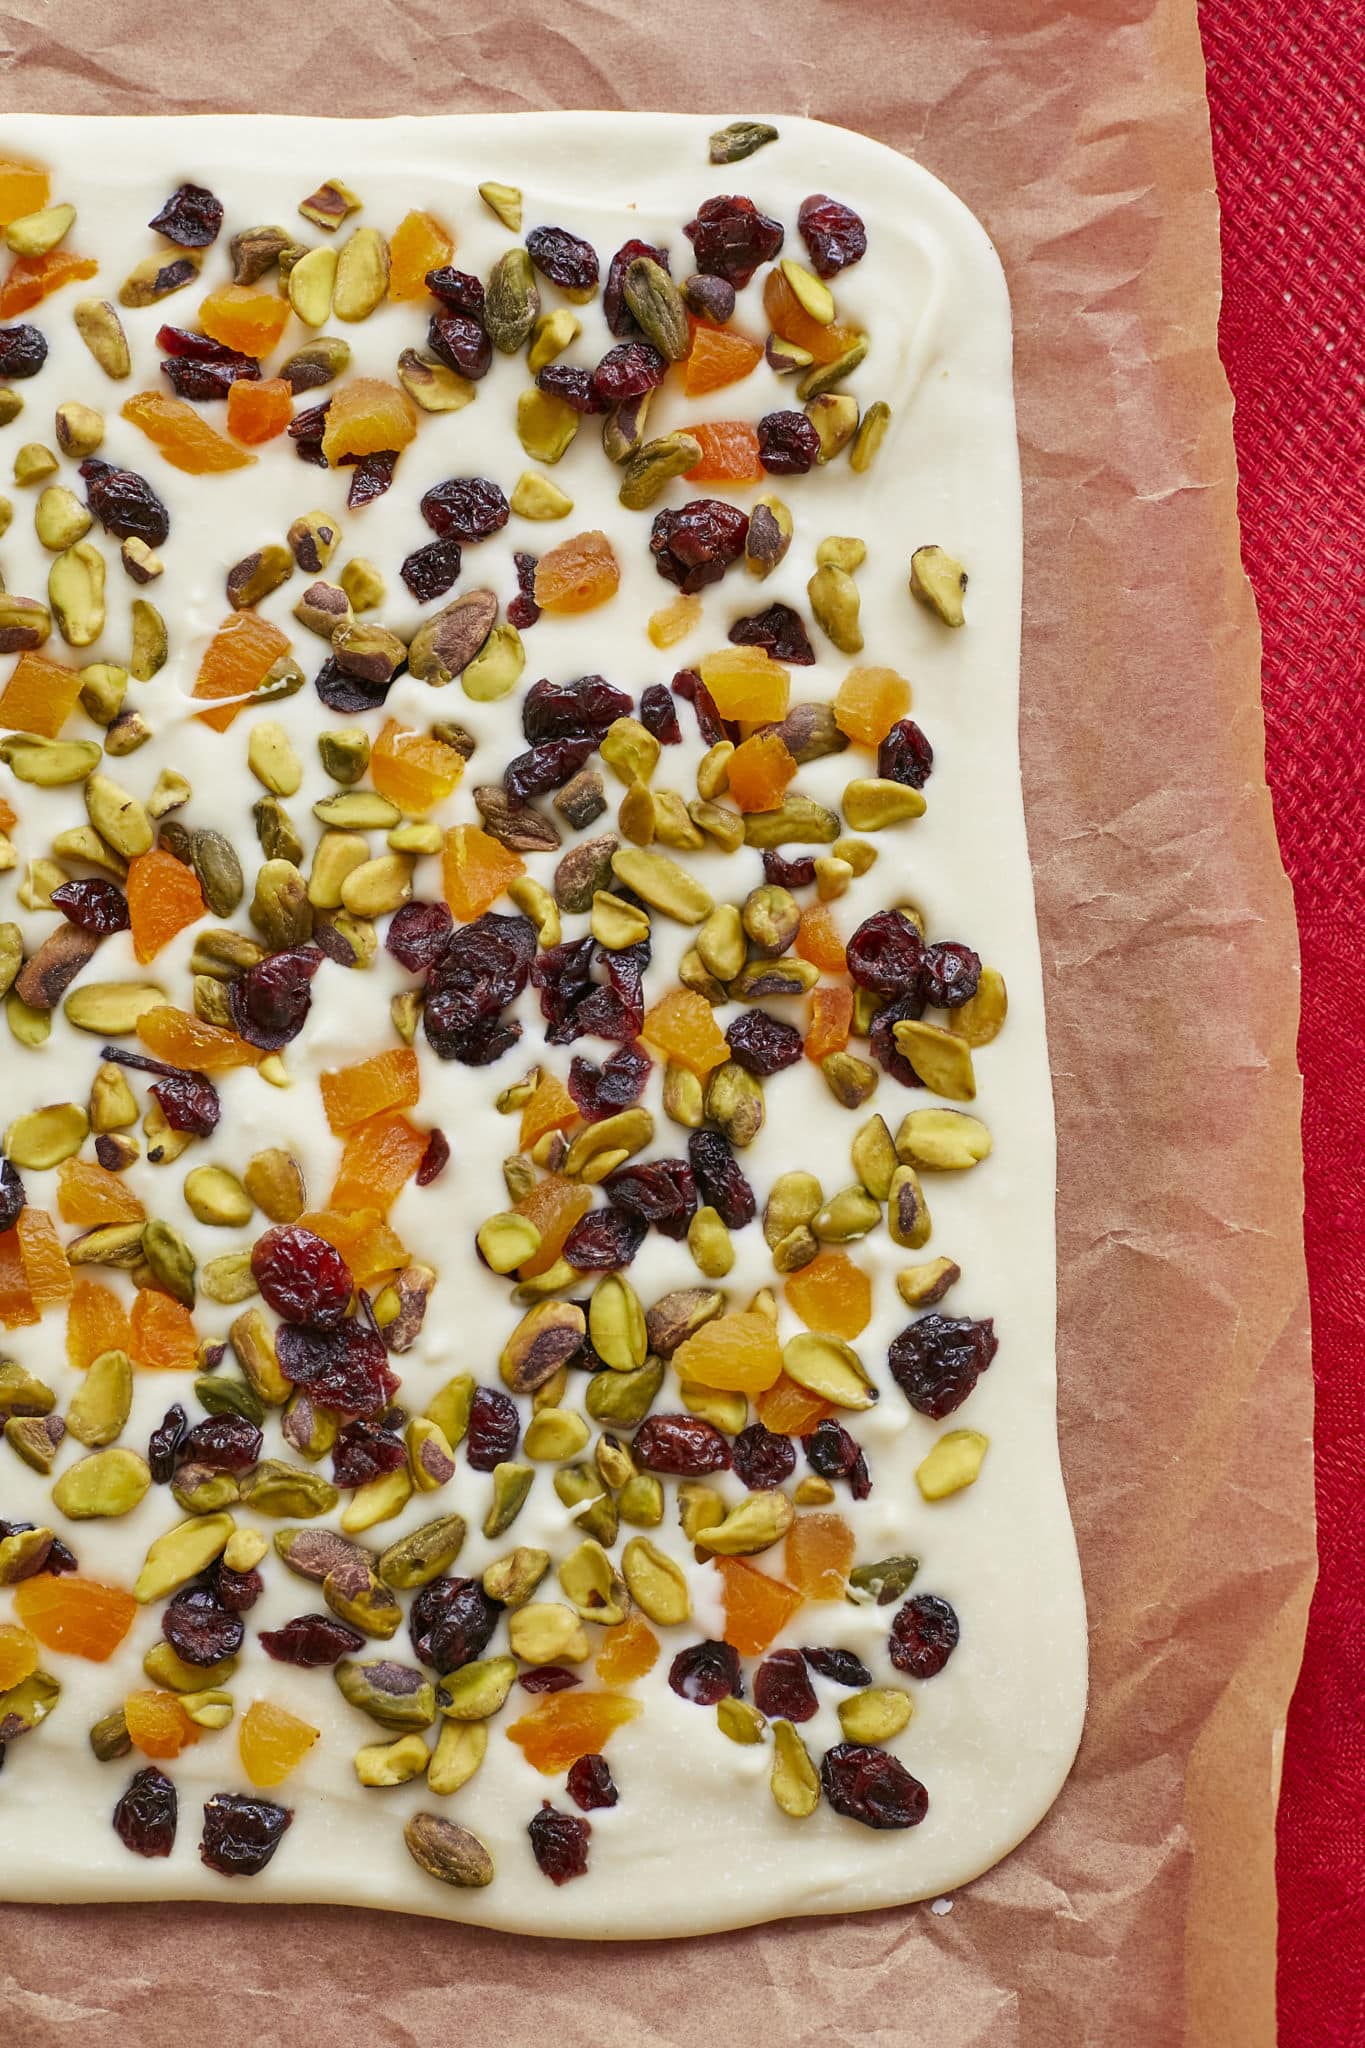 Cranberry White Chocolate Bark, with pistachios and dried apricot, is spread into a thin layer on top of parchment paper.